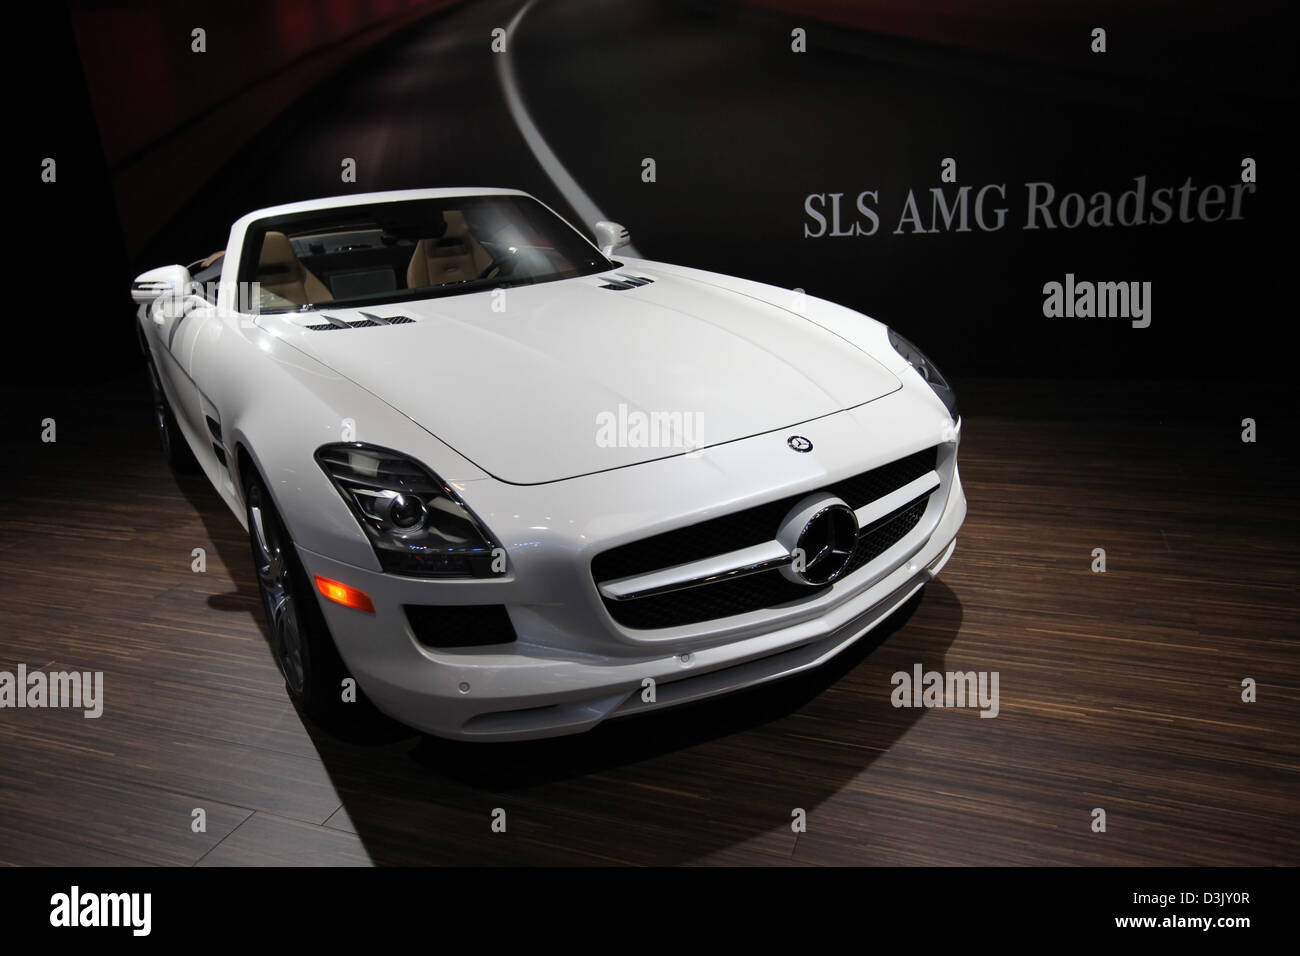 white Mercedes Benz SLS AMG Roadster sports coupe Stock Photo